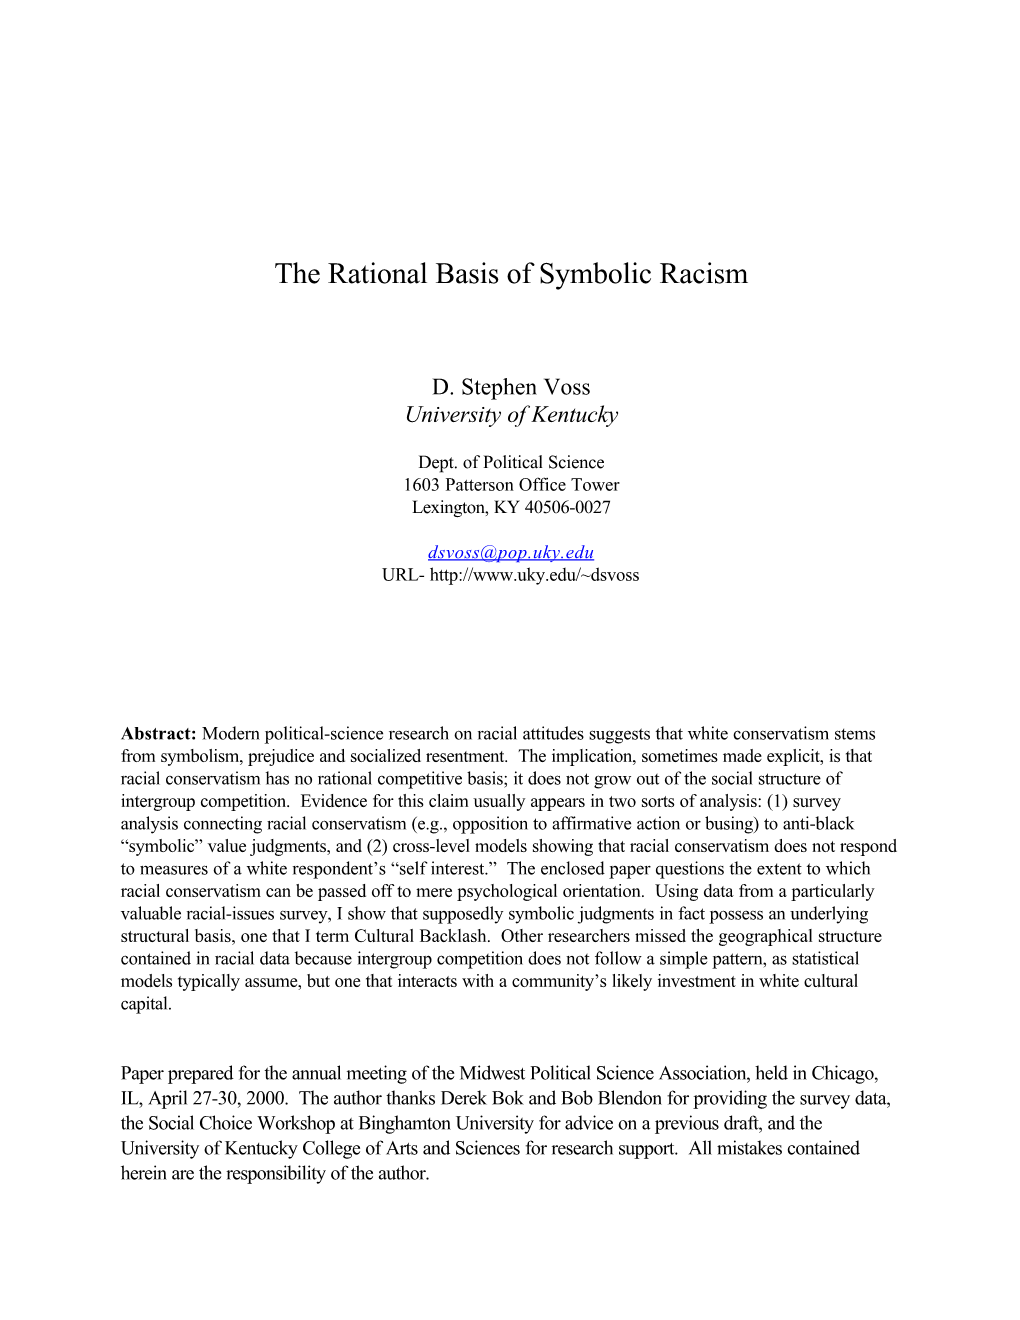 The Rational Basis of Symbolic Racism